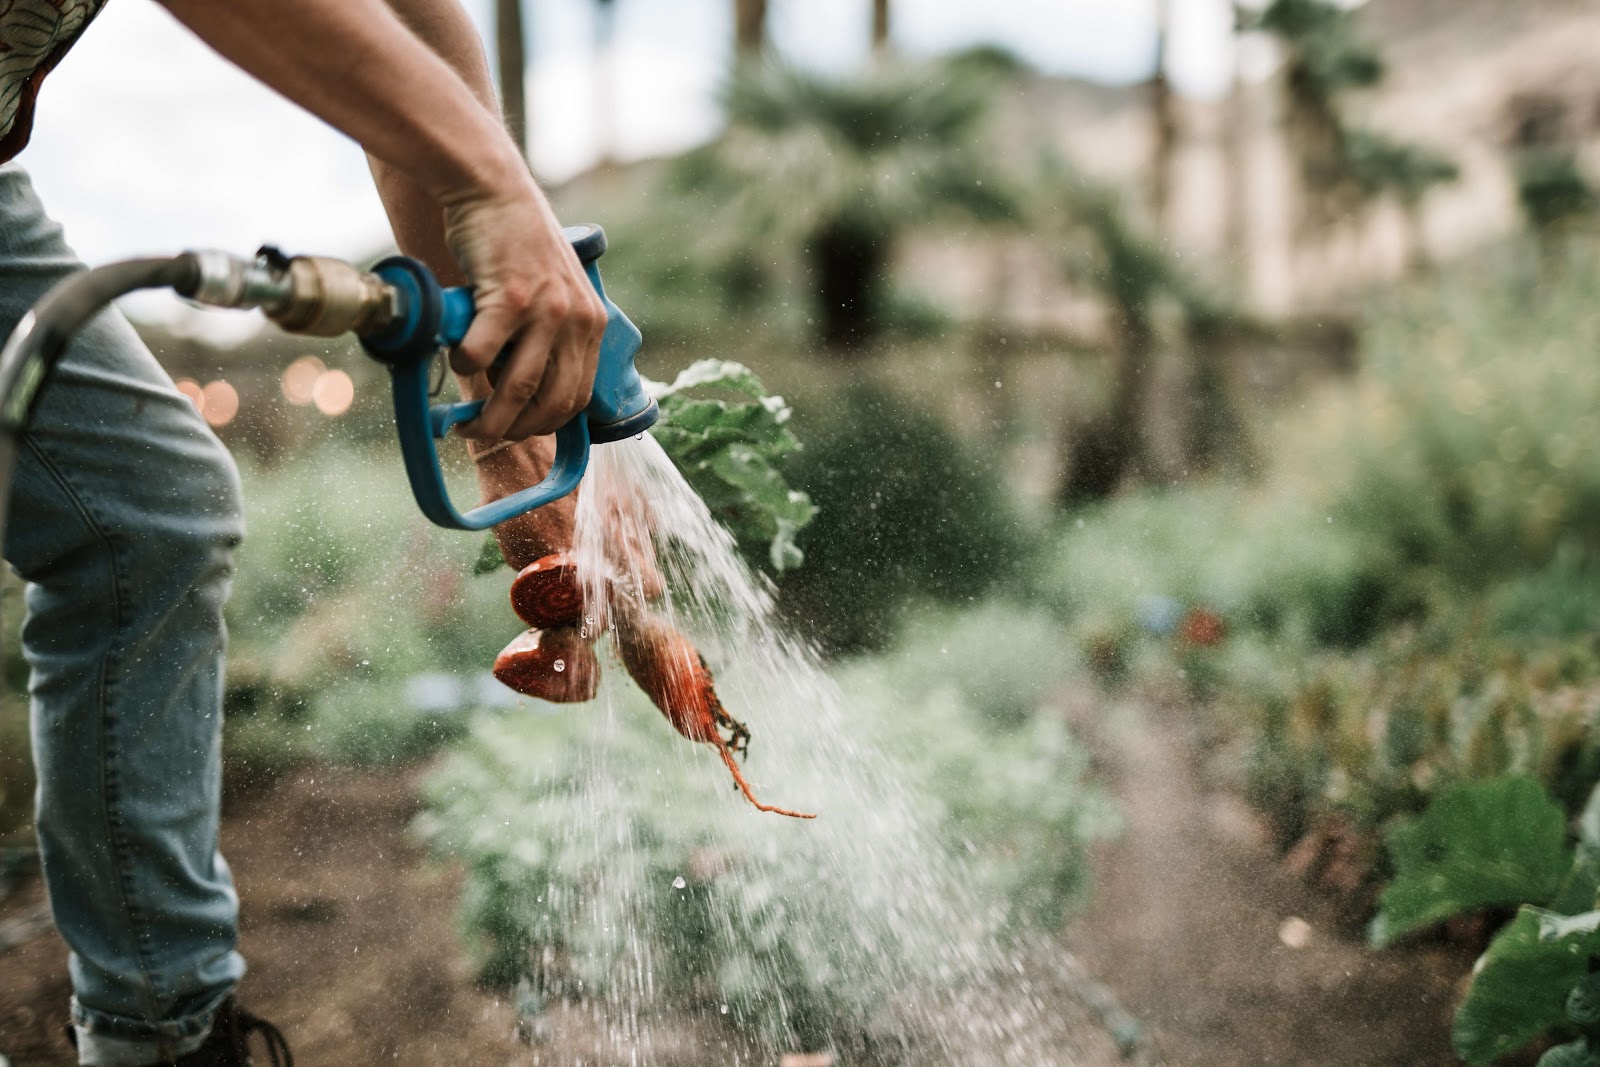 Recently harvested root vegetables being sprayed clean by a man with a hose pipe